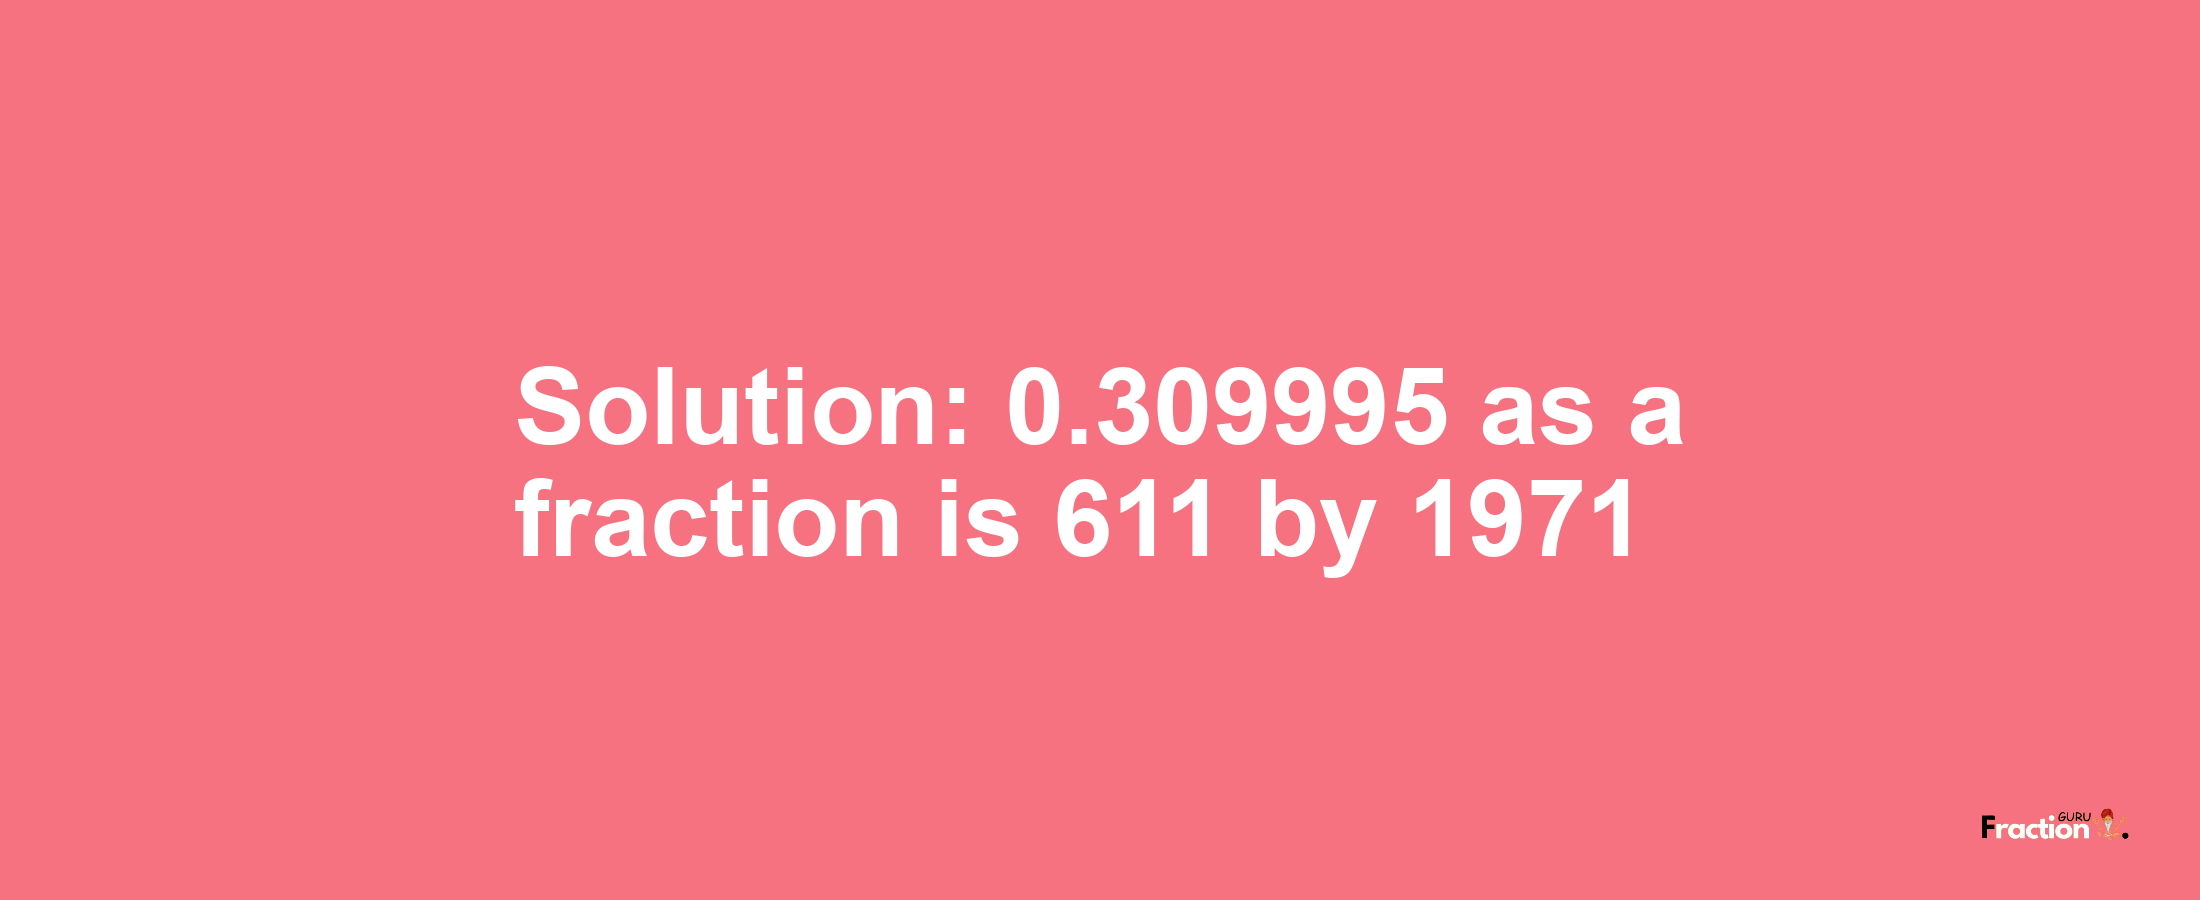 Solution:0.309995 as a fraction is 611/1971